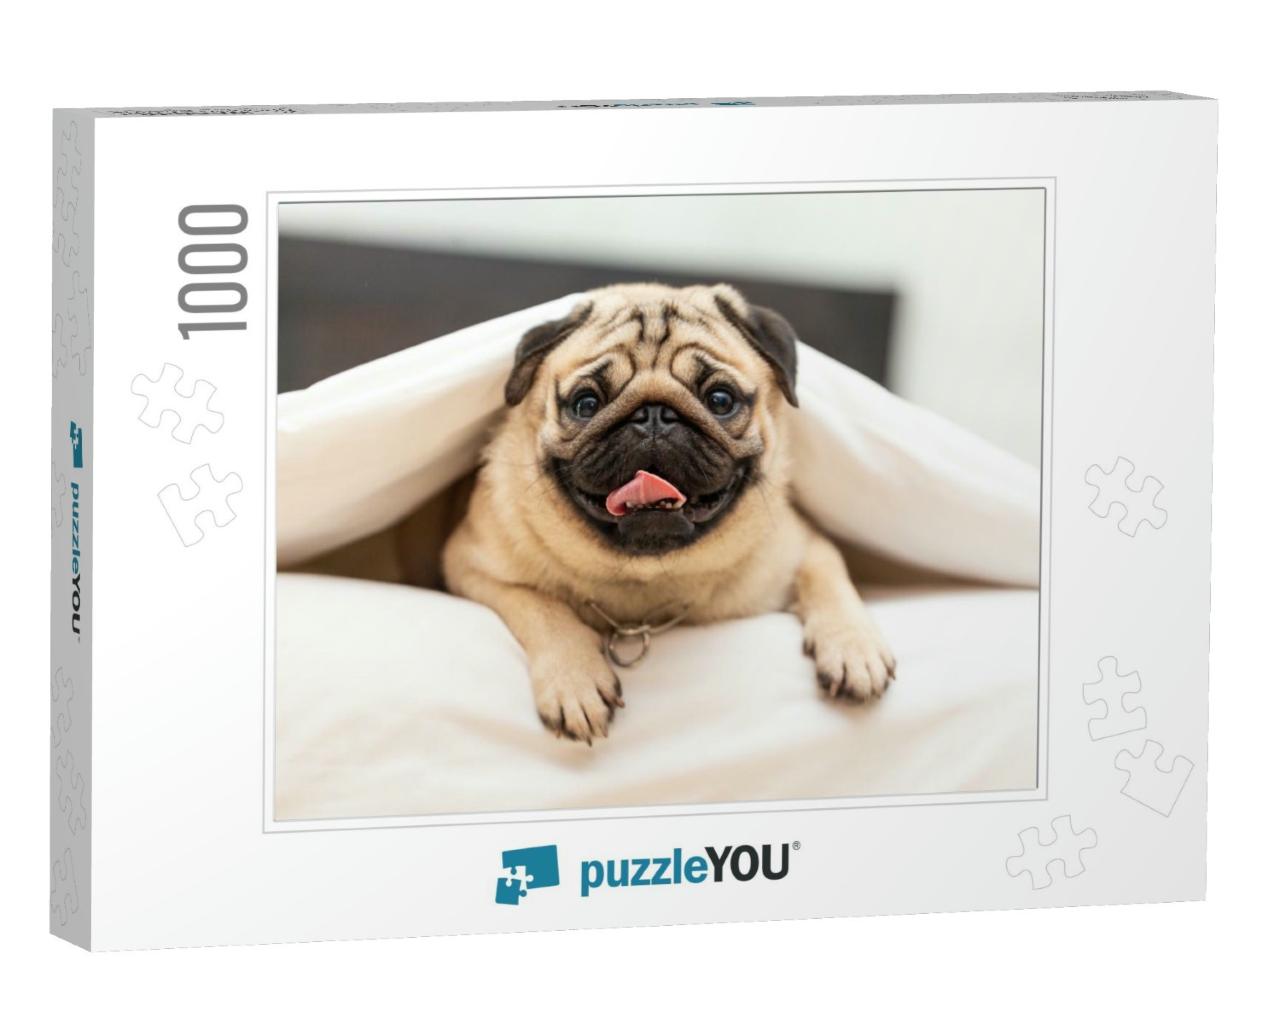 Cute Pug Dog Breed Lying in Blanket on White Bed in Cozy... Jigsaw Puzzle with 1000 pieces